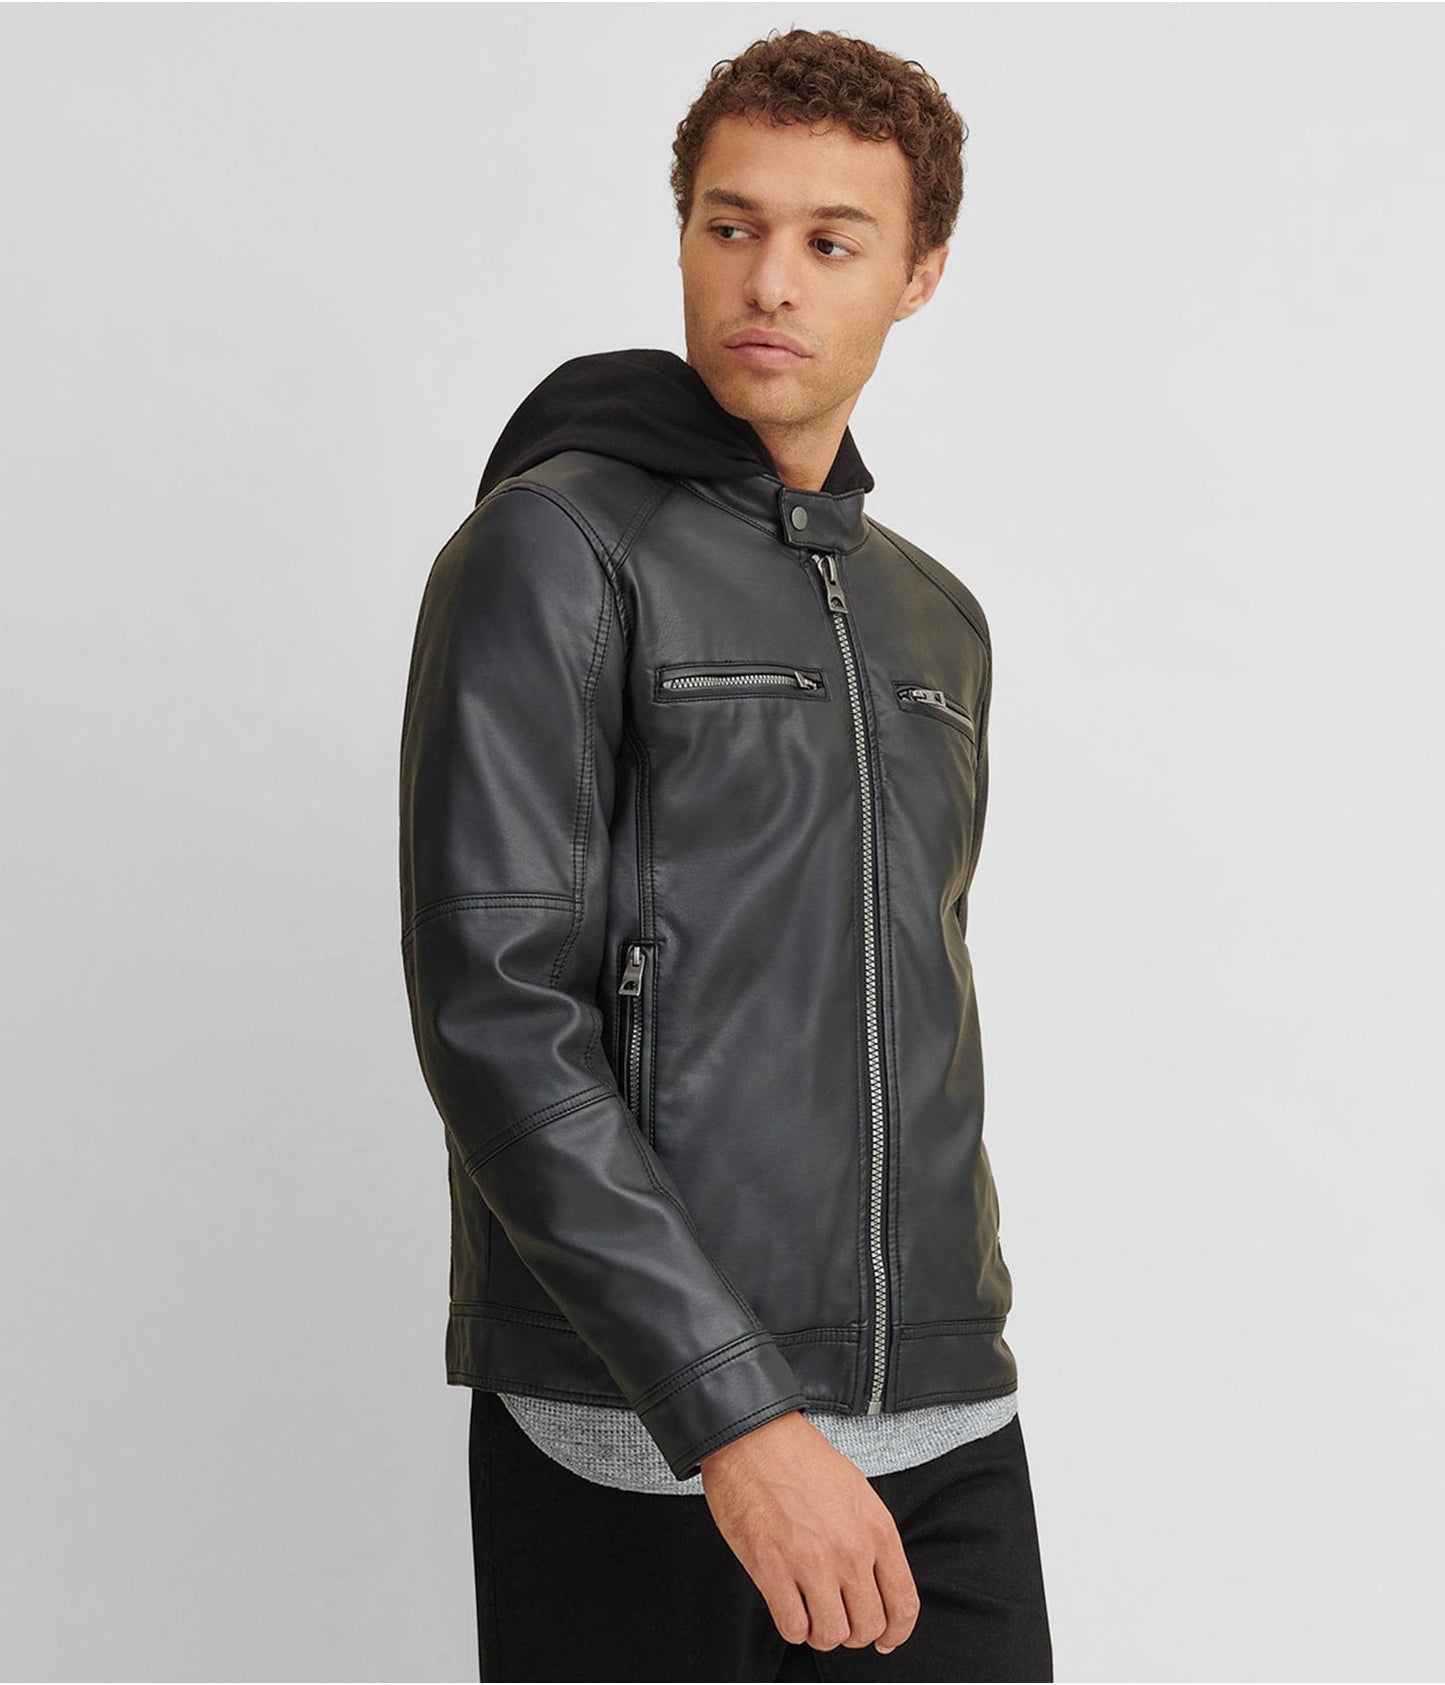 Men's Leather Jacket In Black With Removable Hood